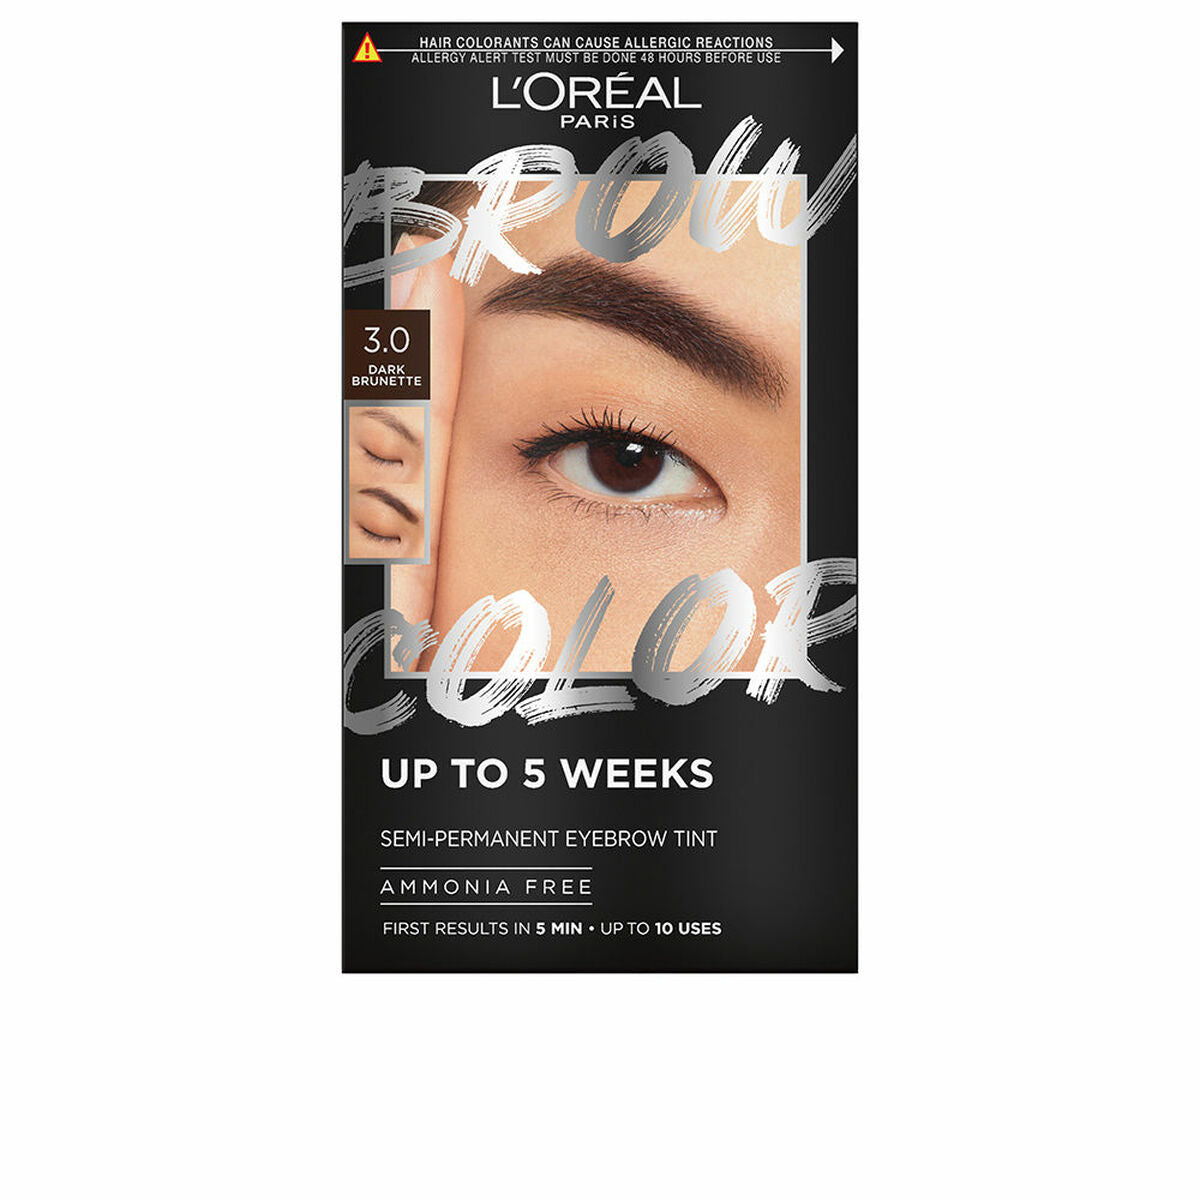 Eyebrow Tint L'Oreal Make Up BROW COLOR Nº 3.0 Dark brunette Semi-permanent 4 Pieces